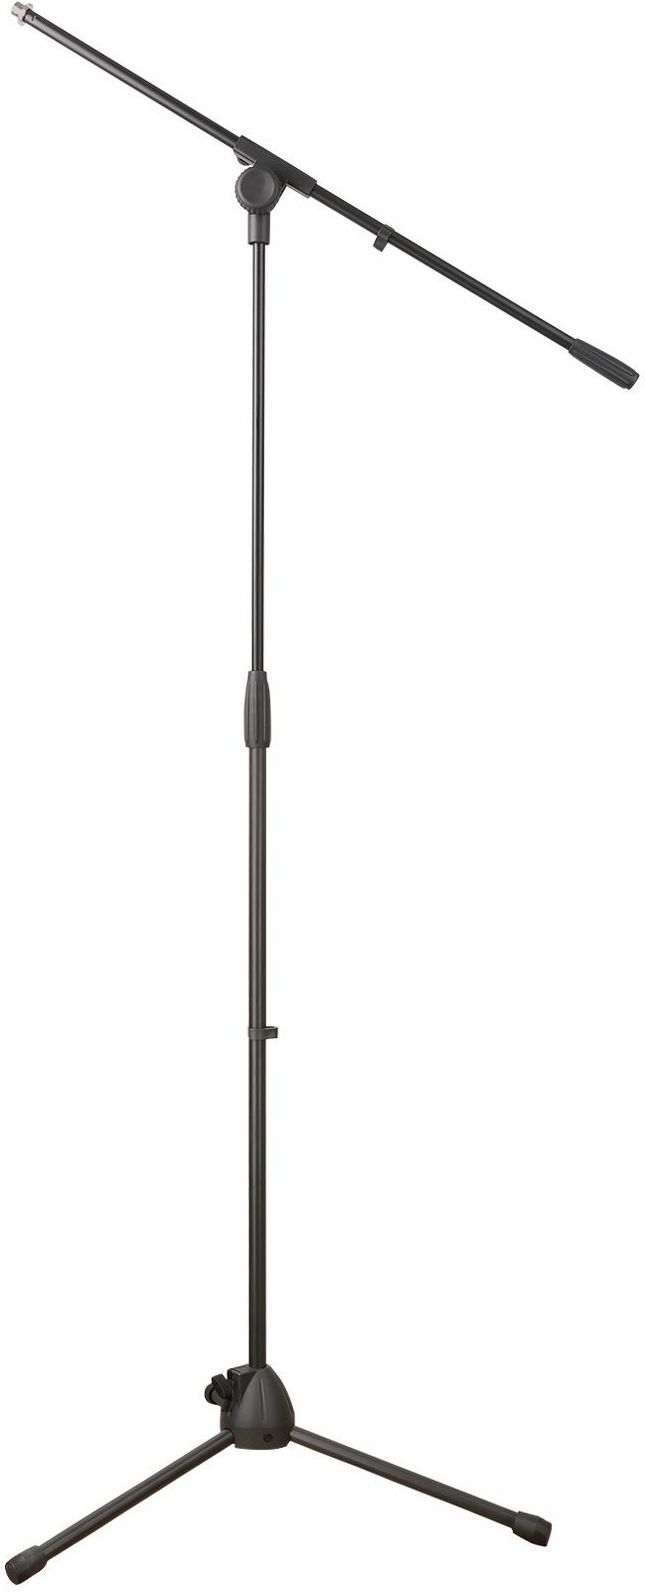 Power Acoustics Ms051 - Microphone stand - Main picture